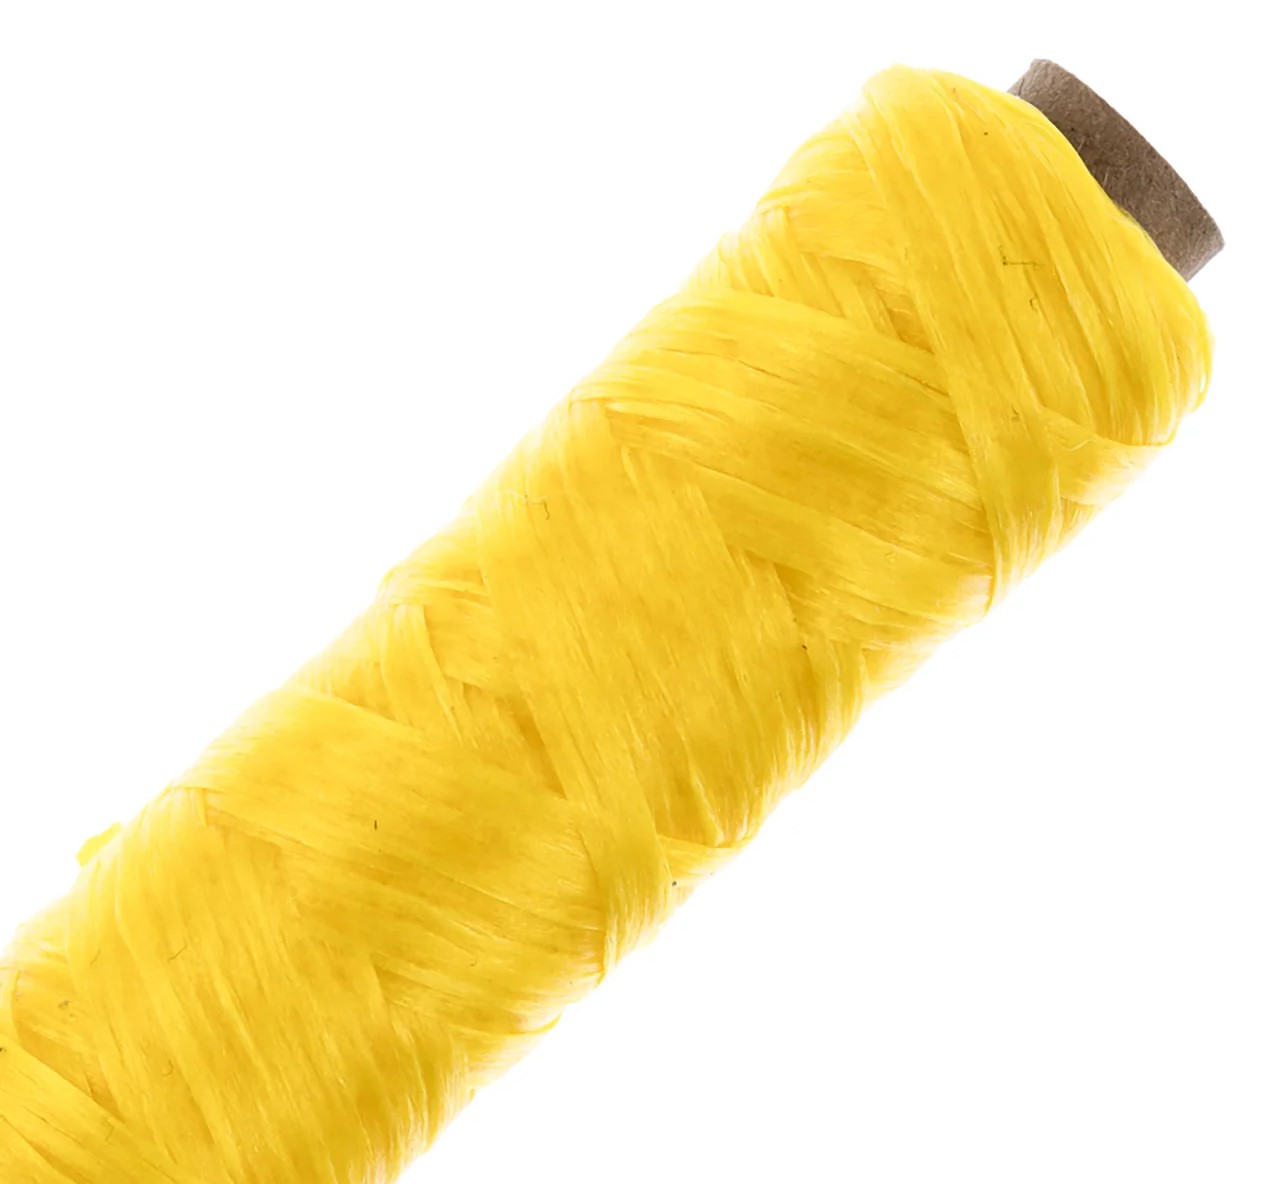 Artificial Sinew- 400 yd spool - Small size